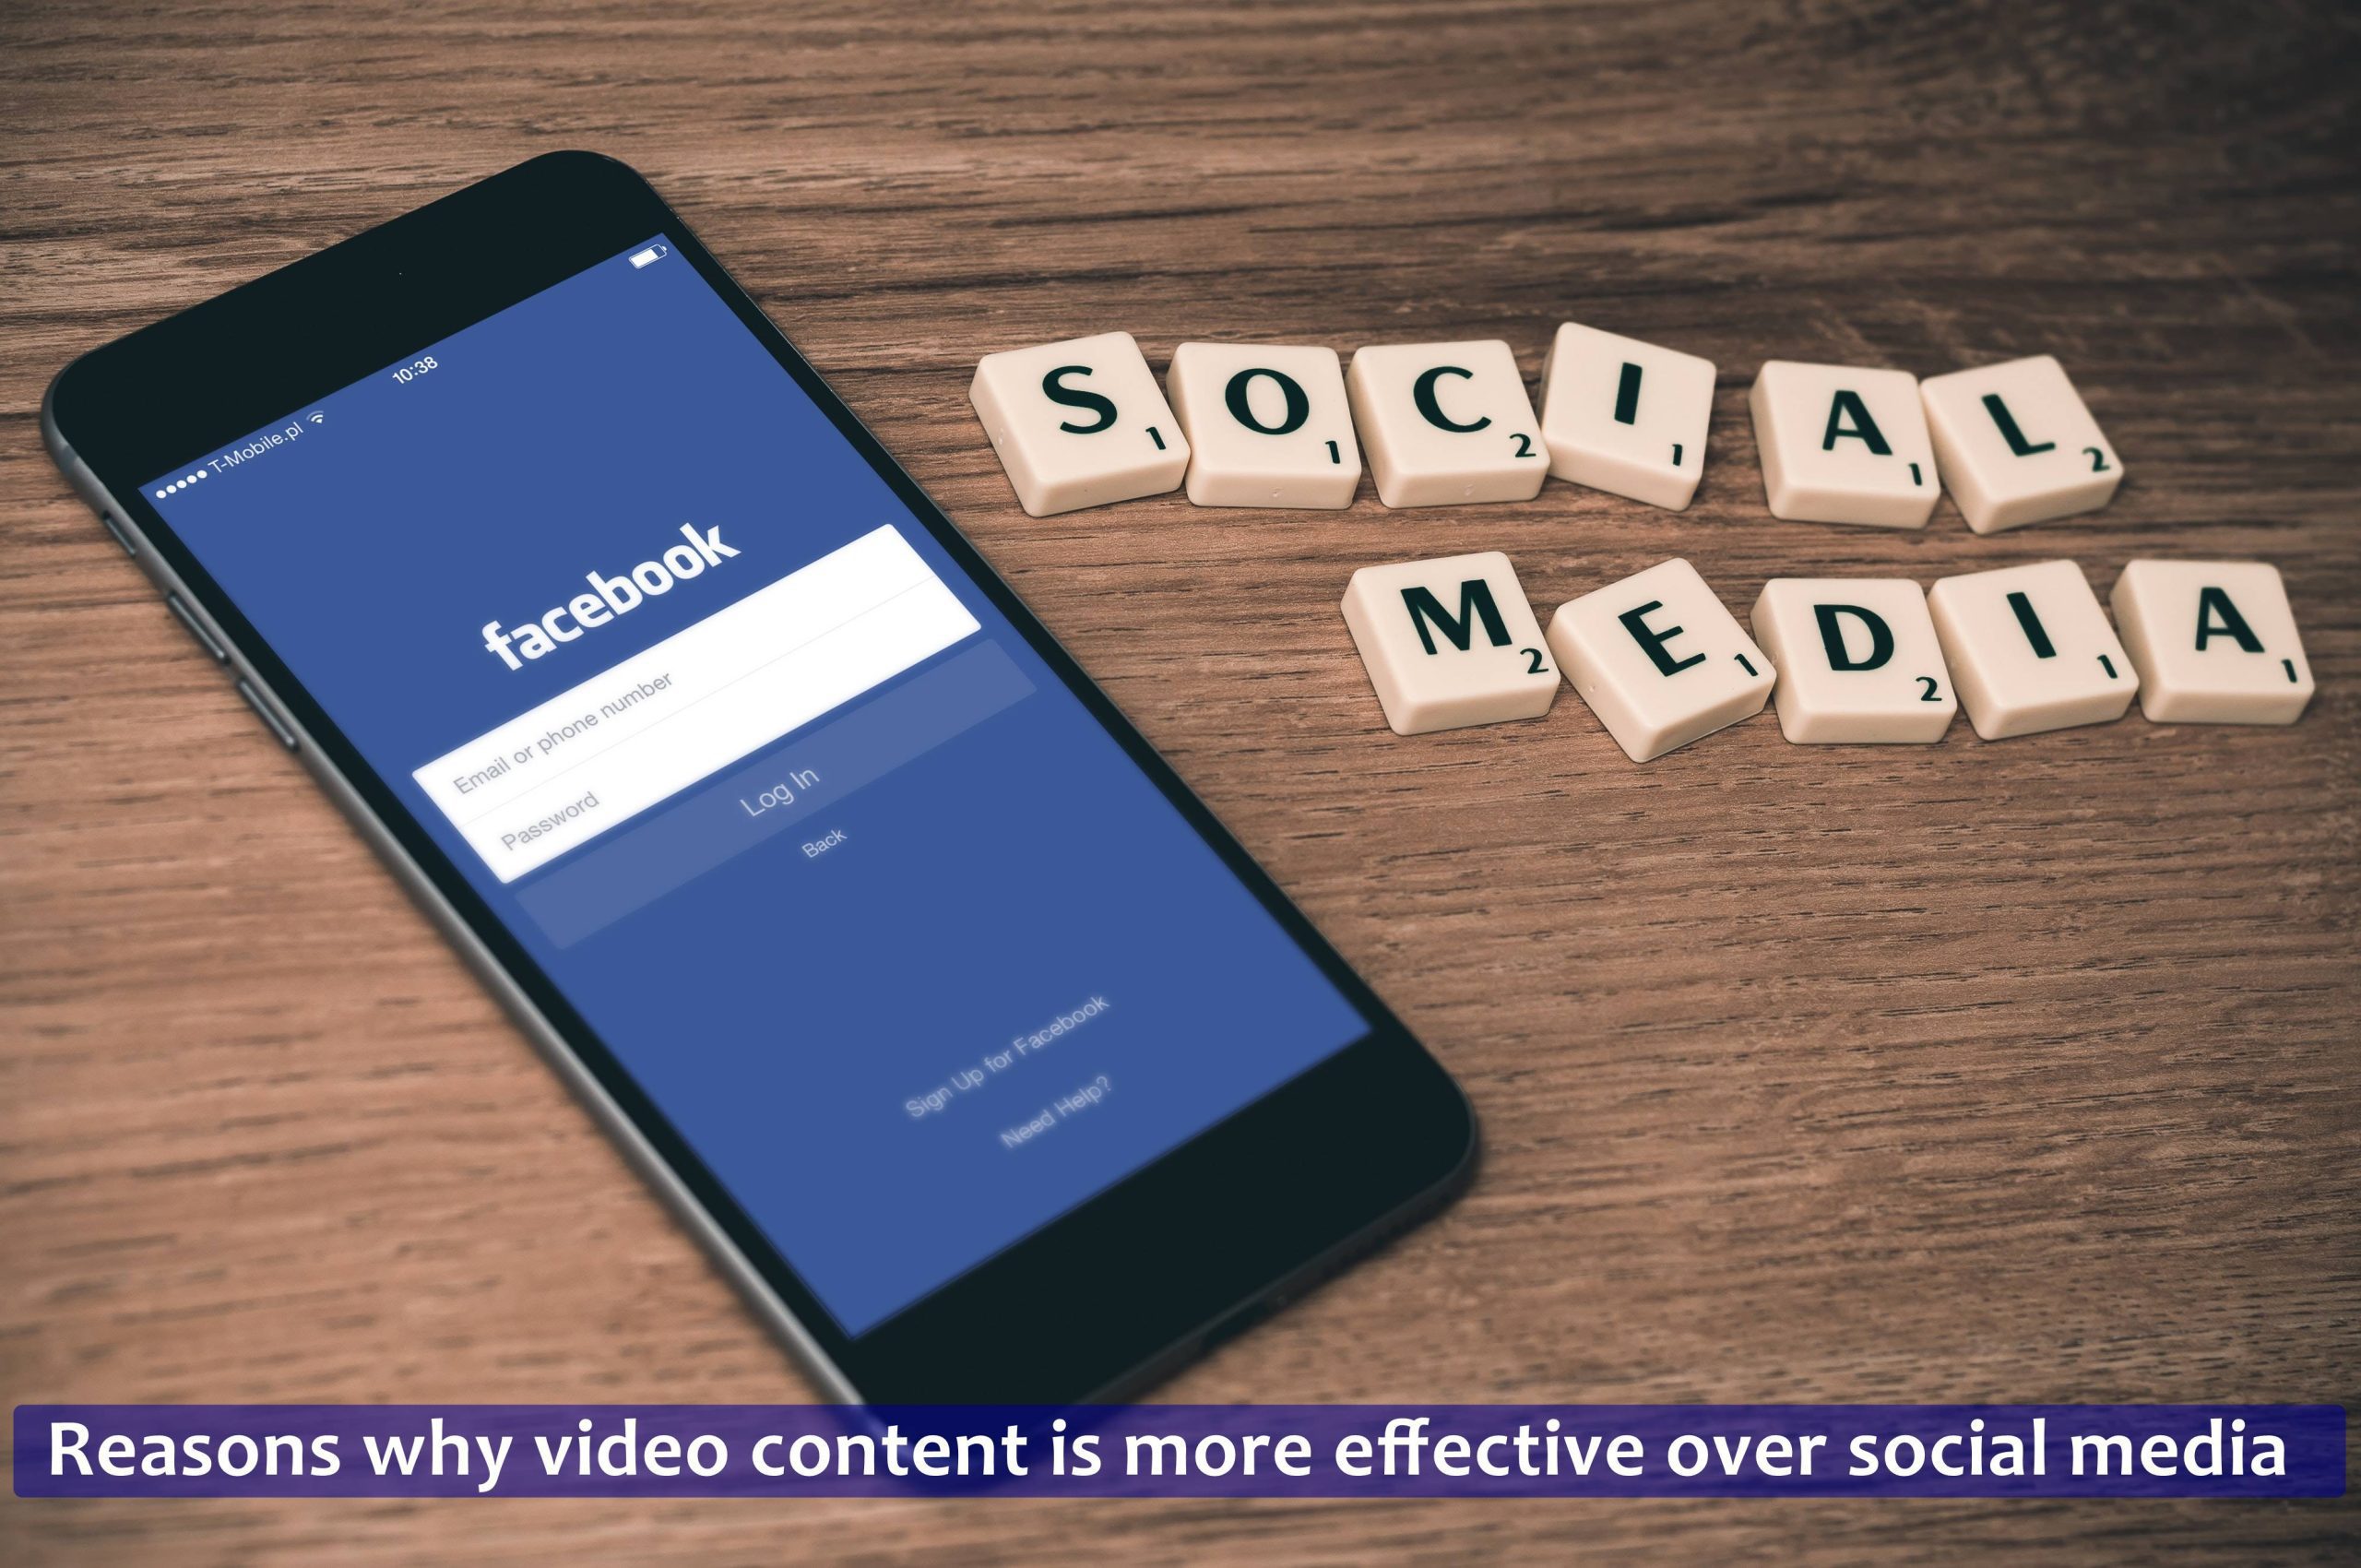 Reasons why video content is more effective over social media